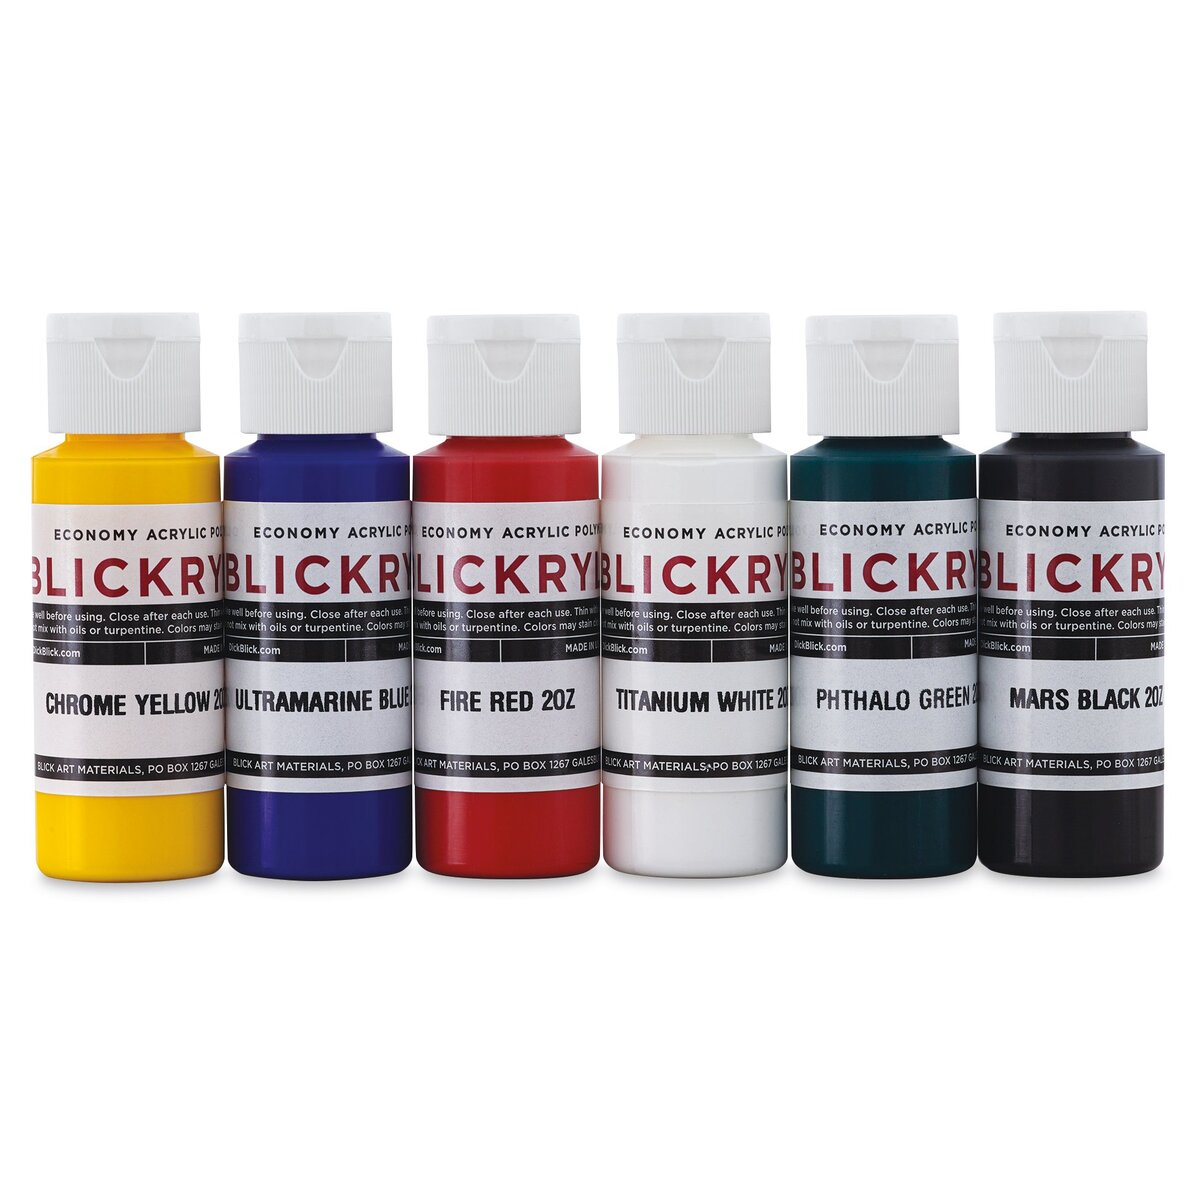 Blickrylic Student Acrylics - Mixing Color Set, Pack of 6 Colors